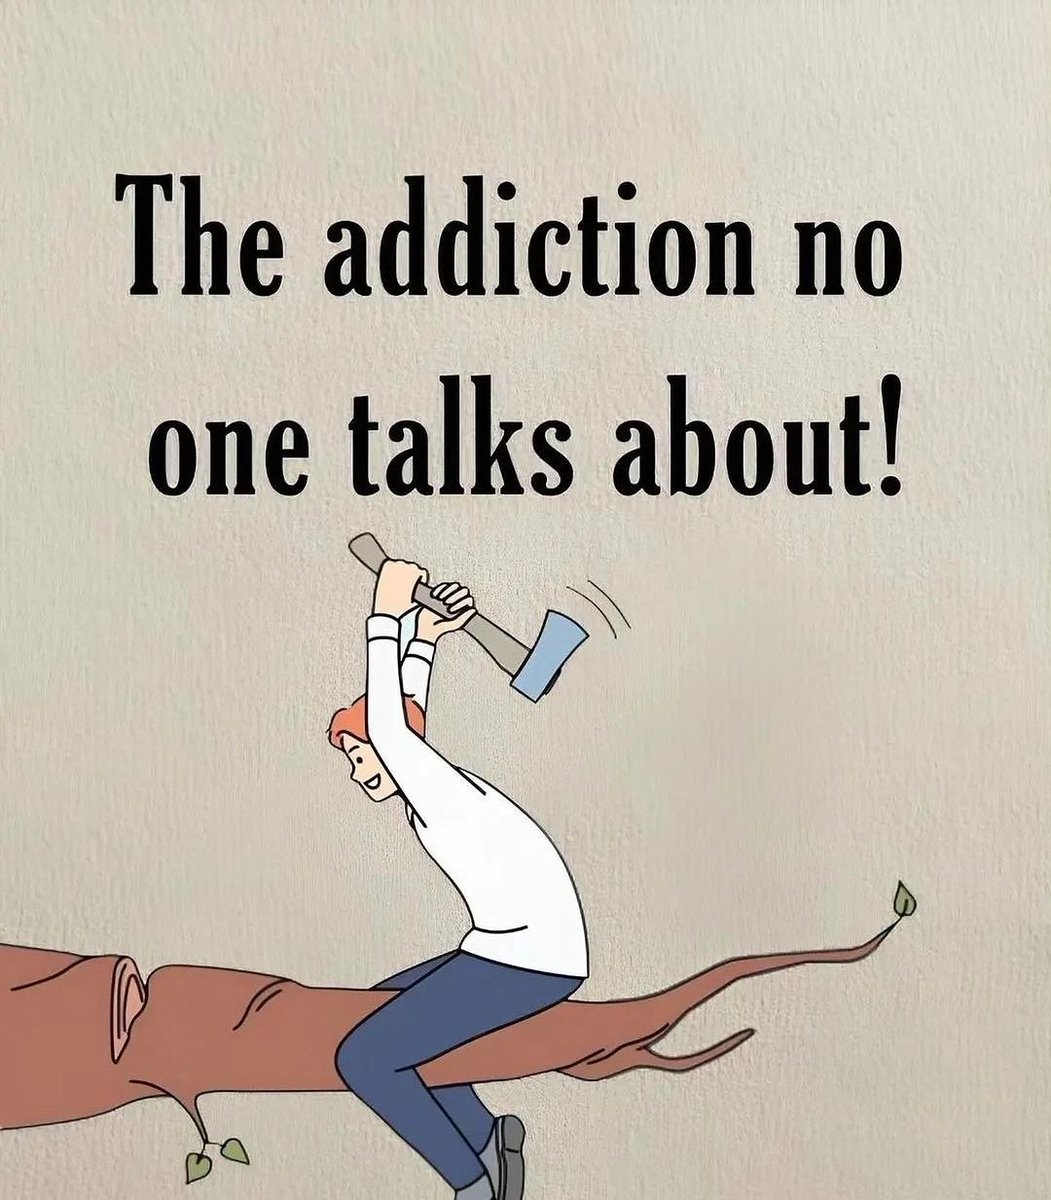 The addiction no one talks about: -THREAD-